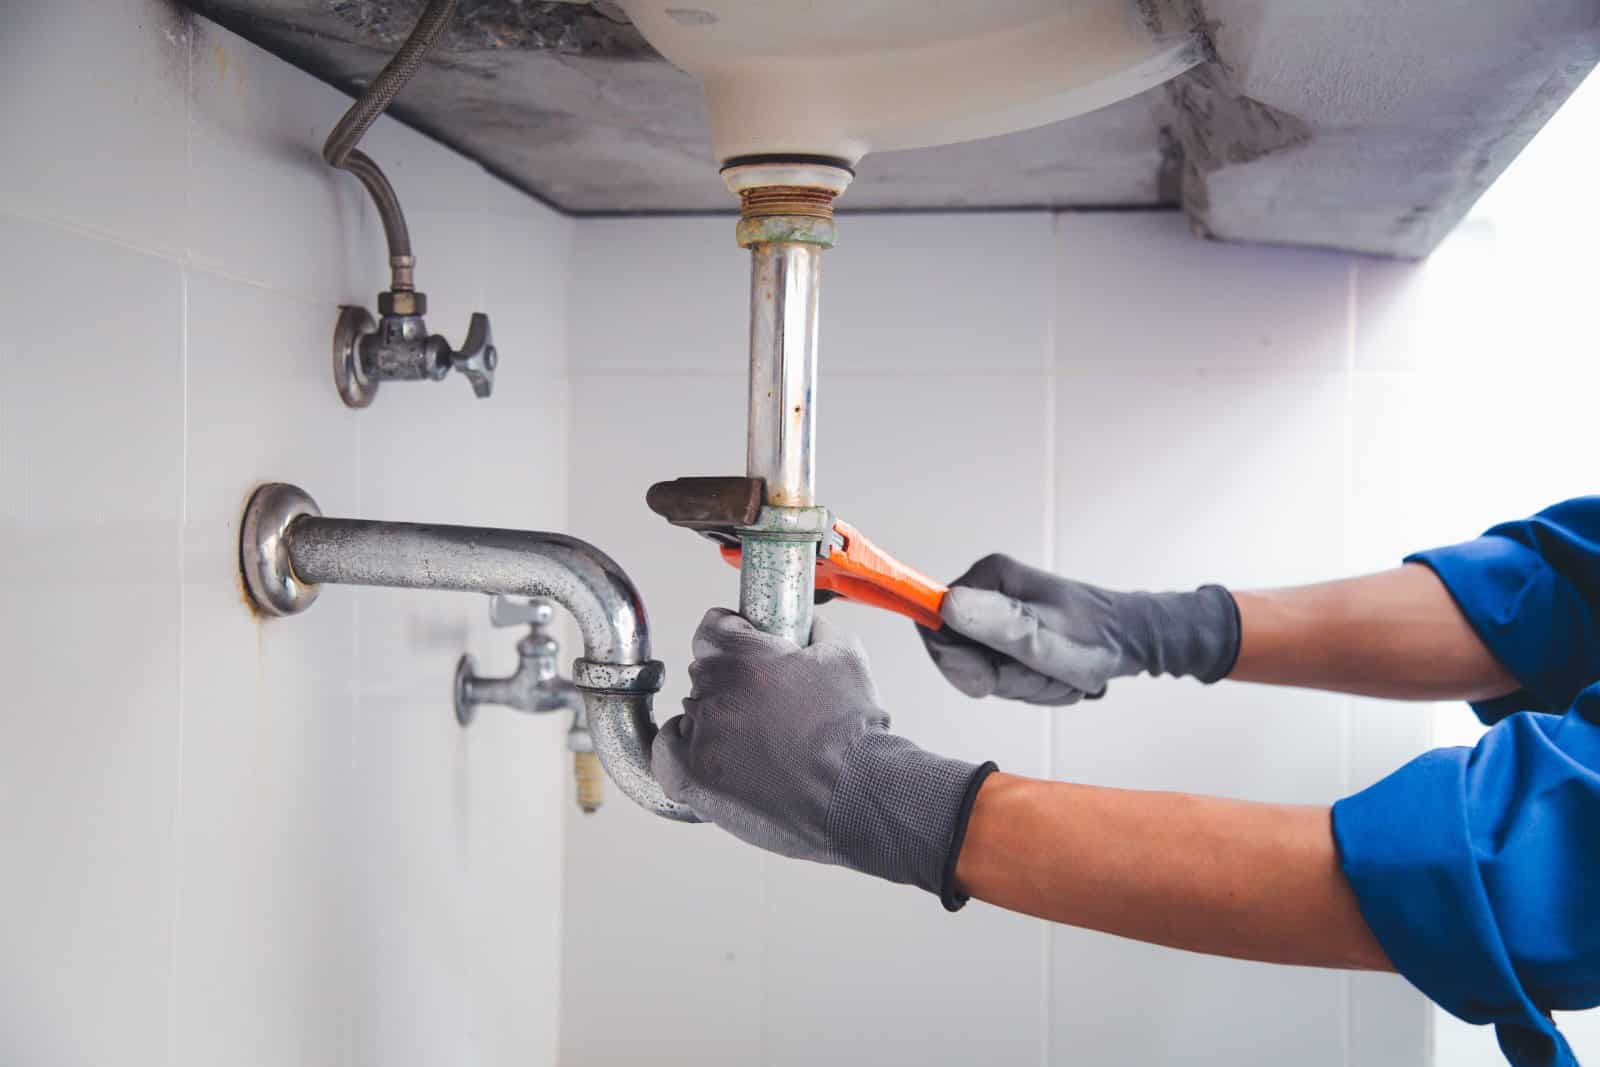 Plumber using a wrench to unclog the drain of the kitchen sink